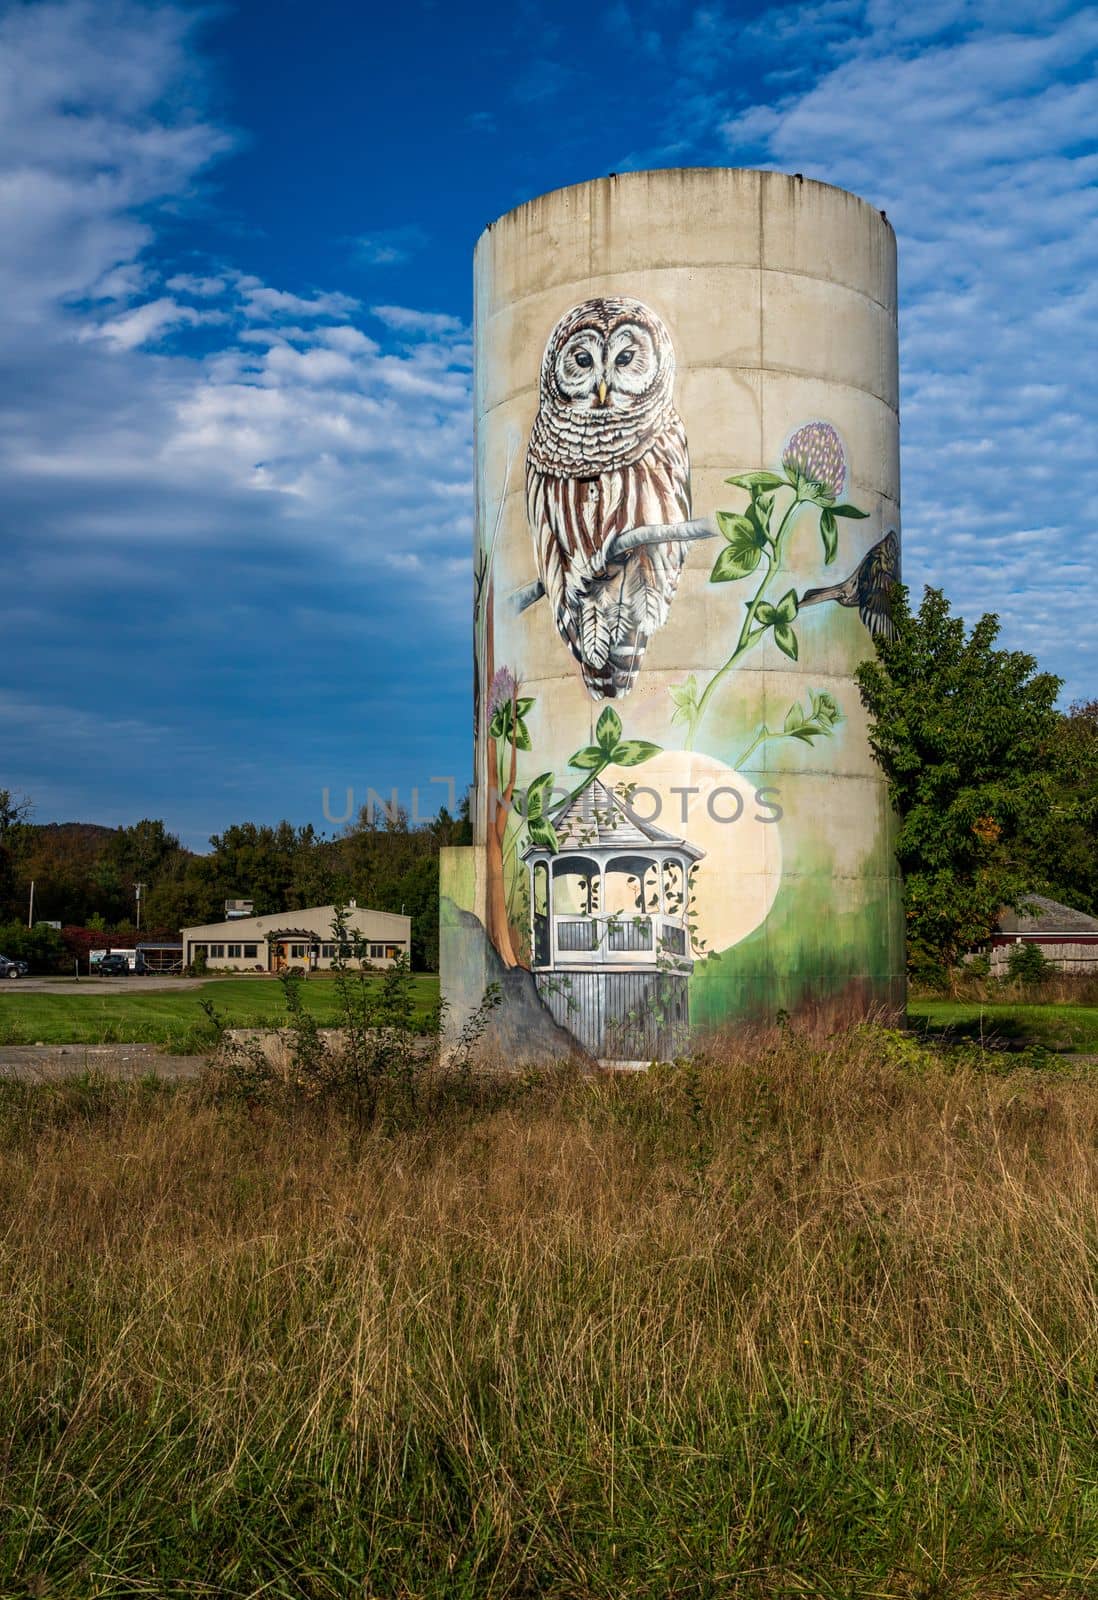 Mural on concrete silos in Jefferson Vermont by steheap